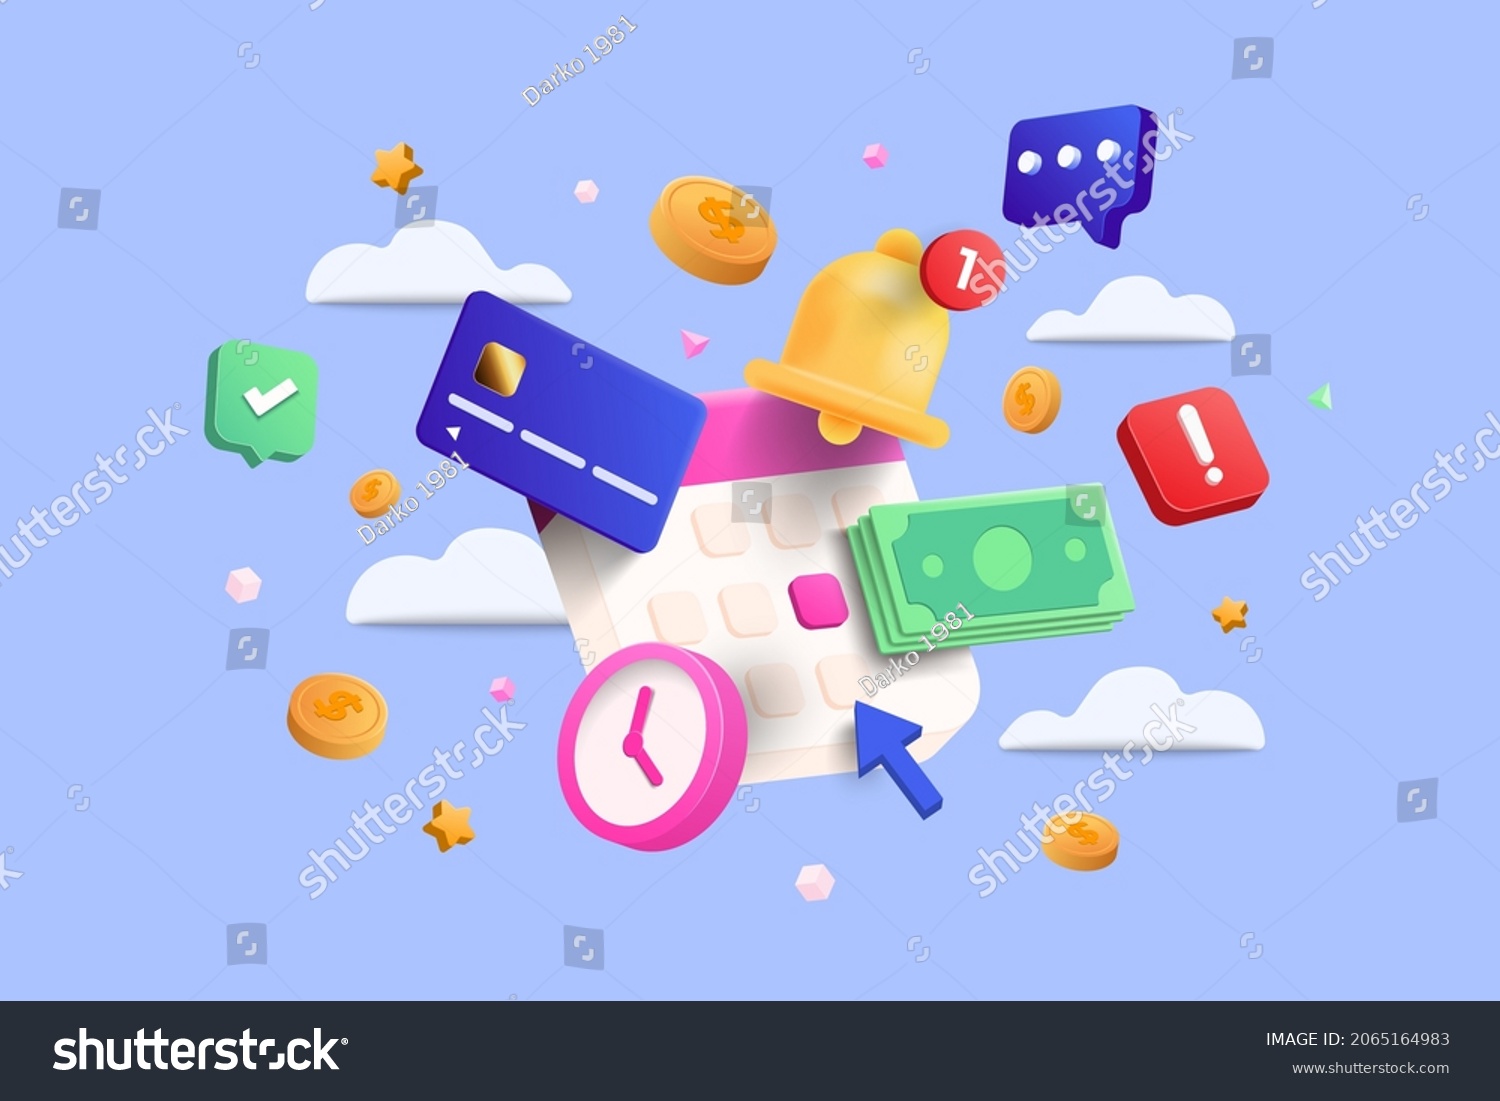 SVG of Flying calendar, checkbook, with coins, clock and credit card on blue isolated background symbolizing quick loan. Fast money concept. 3d vector illustration svg